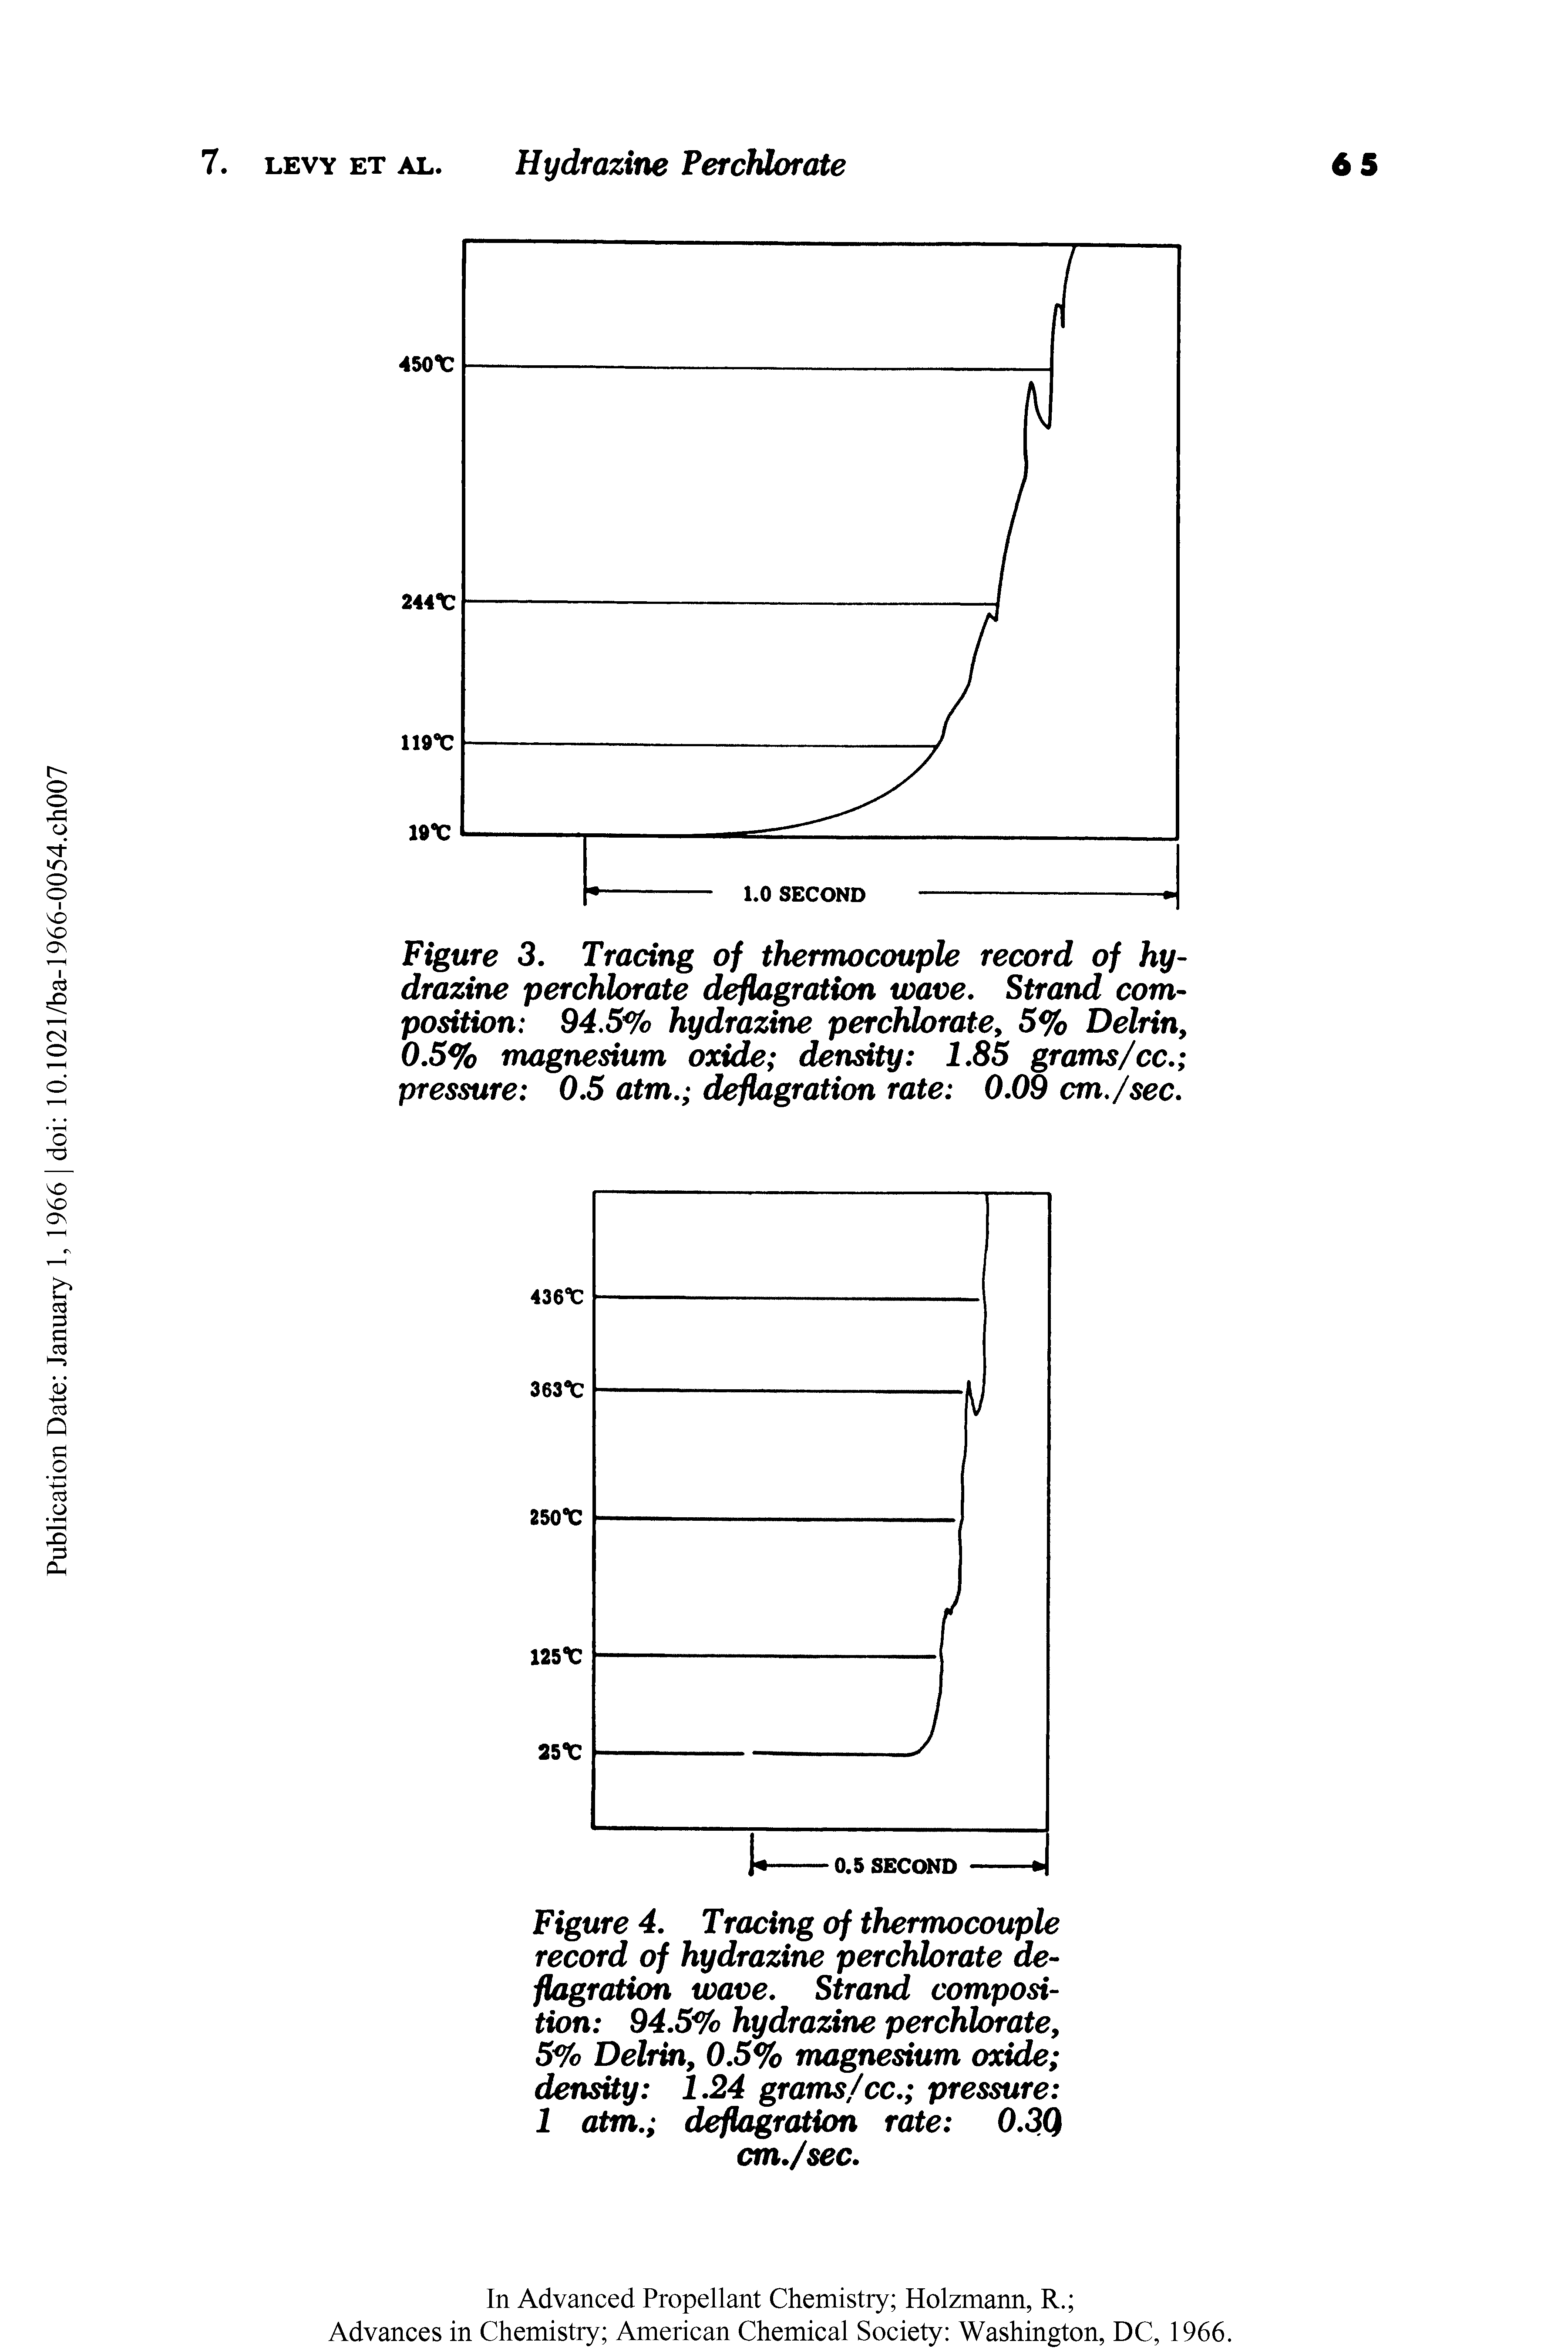 Figure 3. Tracing of thermocouple record of hydrazine perchlorate deflagration wave. Strand composition 94.5% hydrazine perchlorate, 5% Delrin, 0.5% magnesium oxide density 1.85 grams/cc. pressure 0.5 atm. deflagration rate 0.09 cm./sec.